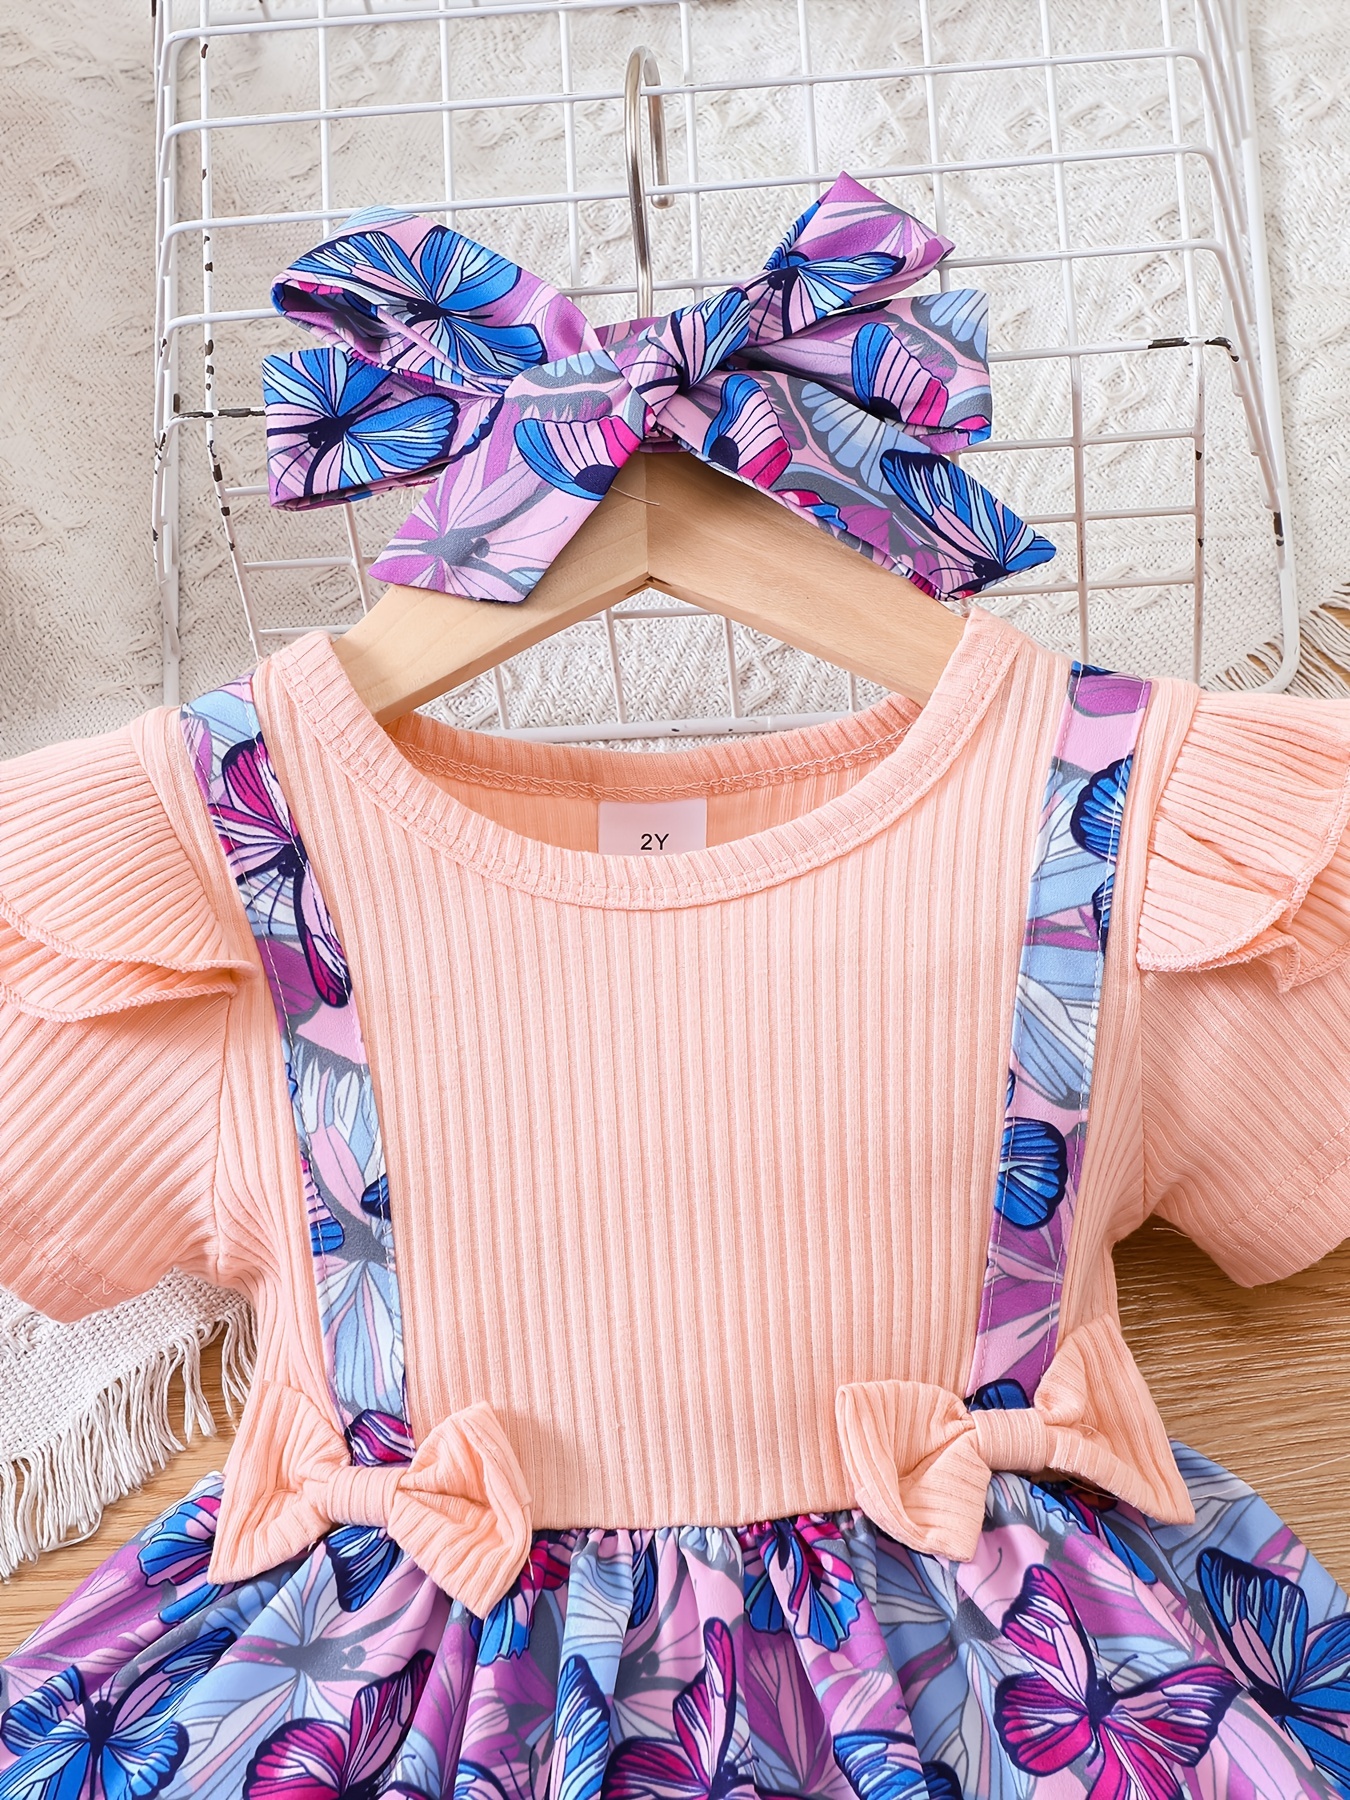 Baby Girl Butterfly Embroidery Mesh Ruffle Trim Bow Front Dress